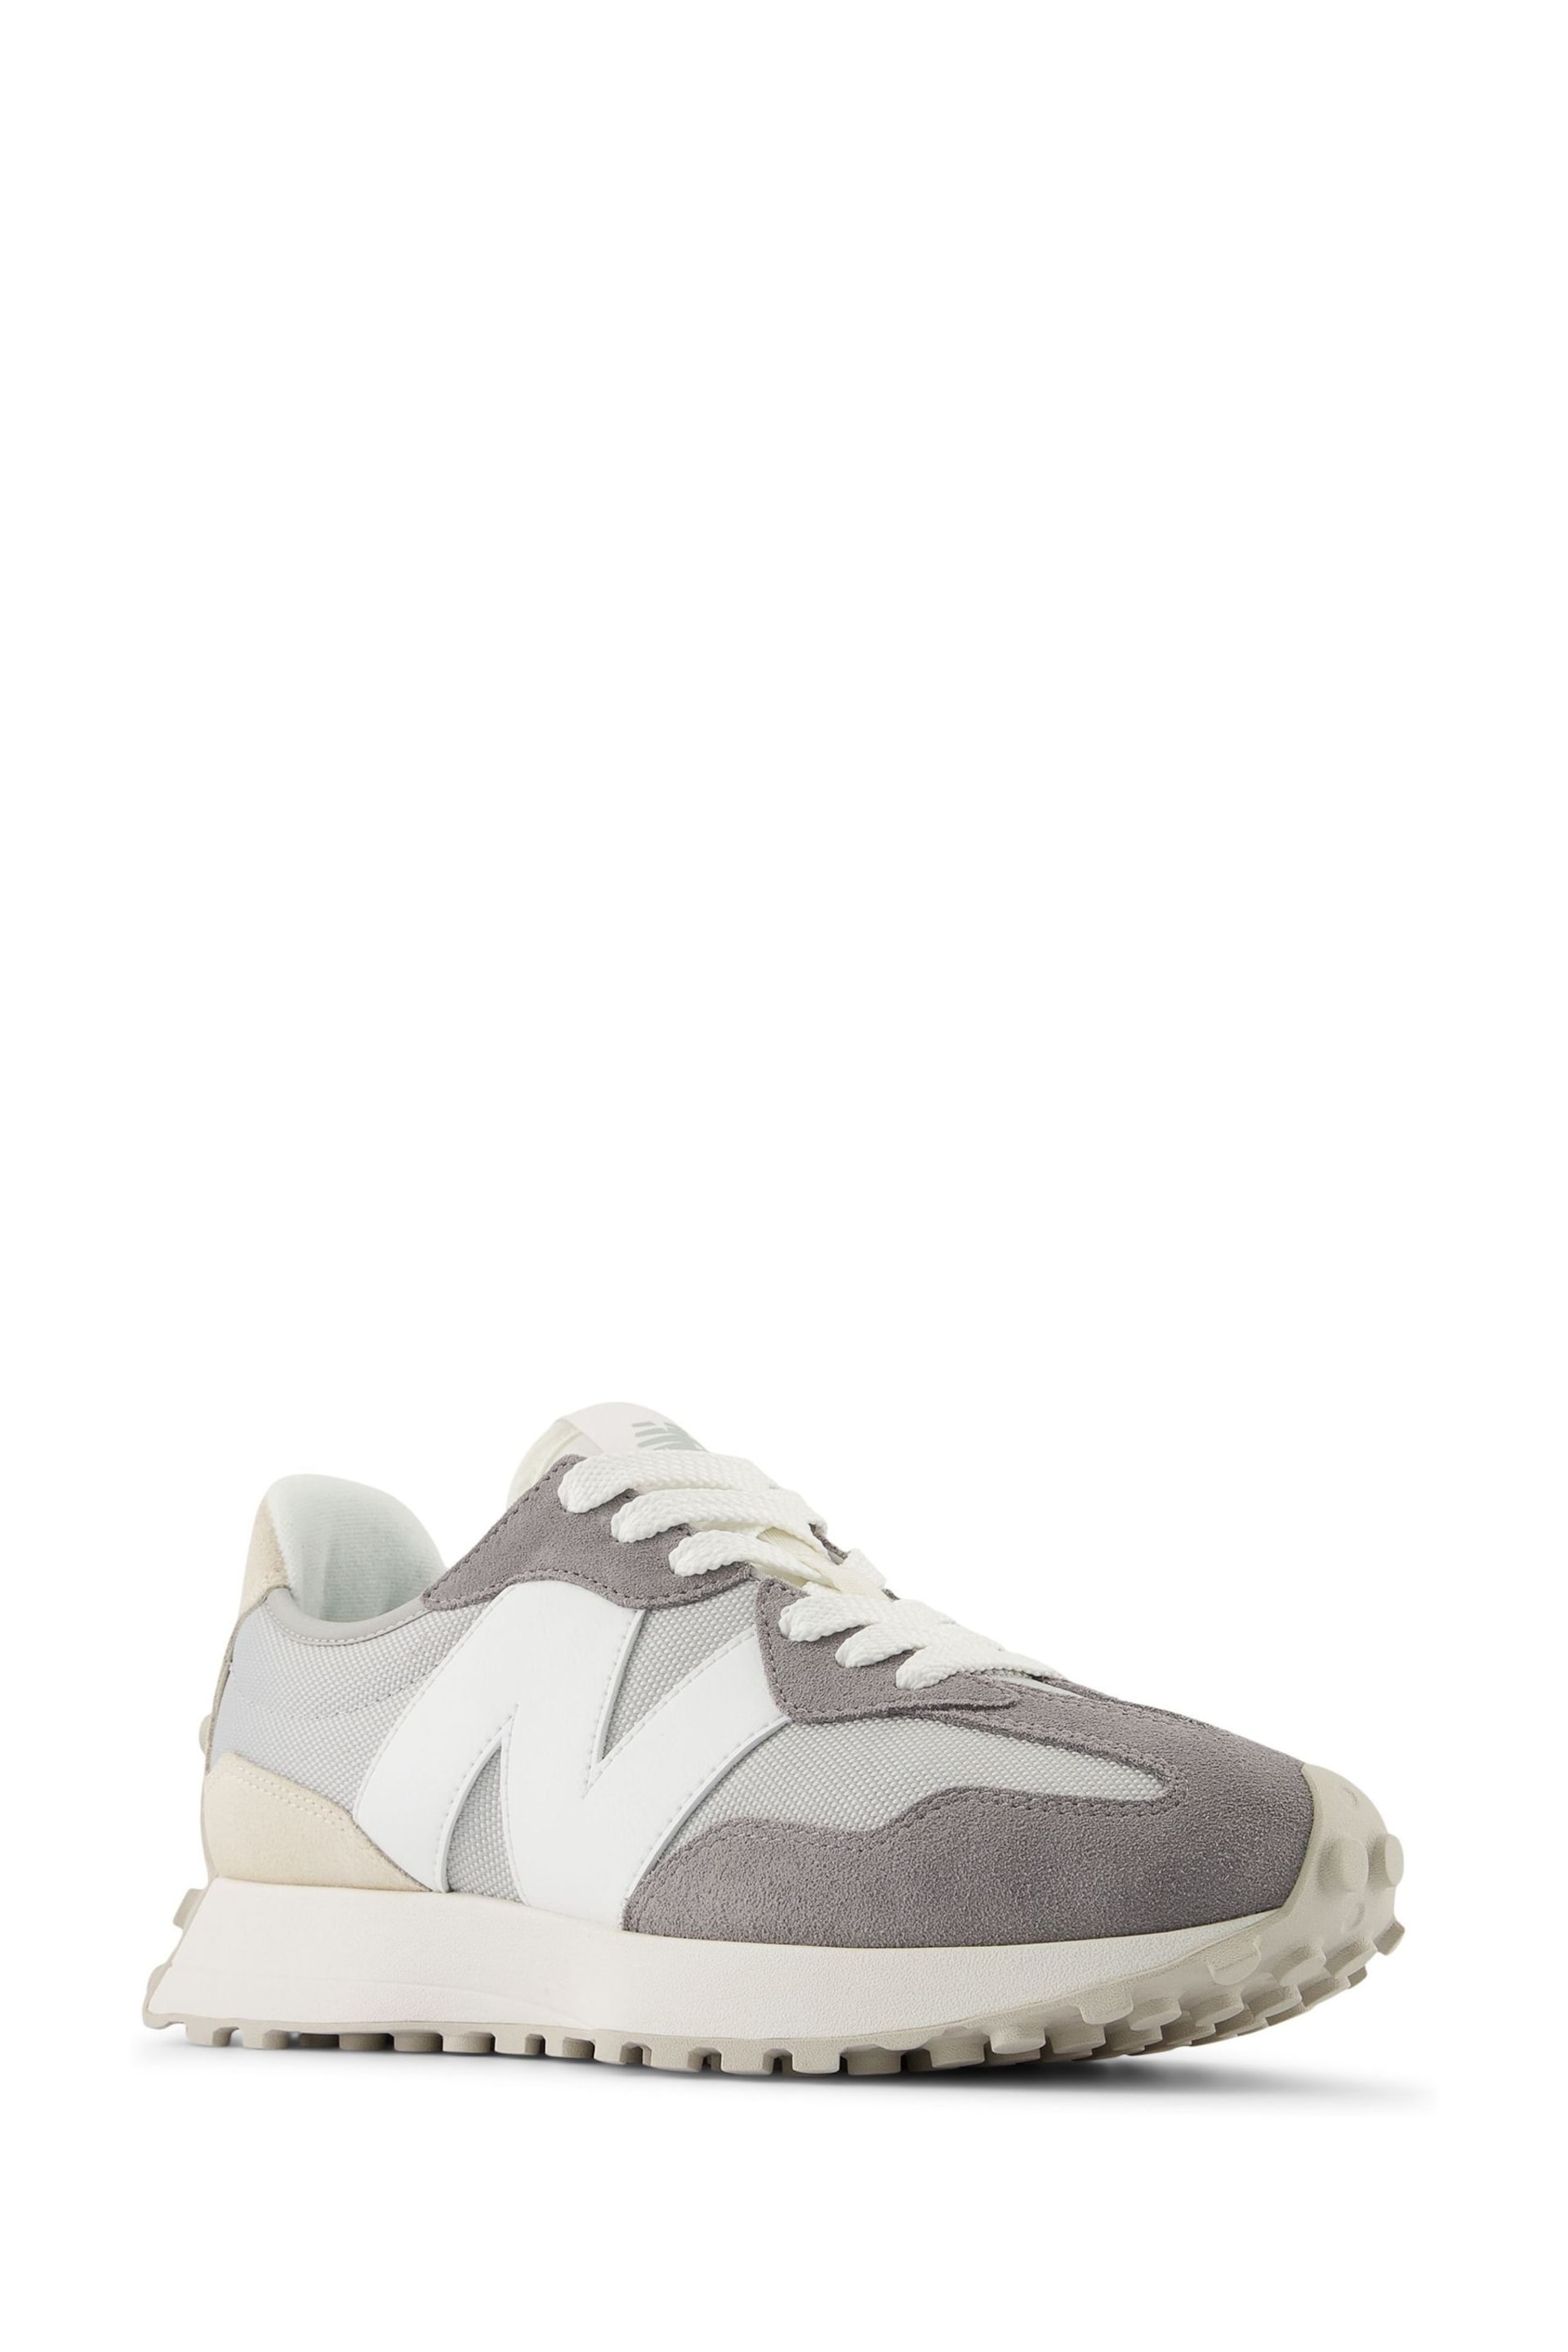 New Balance Grey 327 Trainers - Image 1 of 12